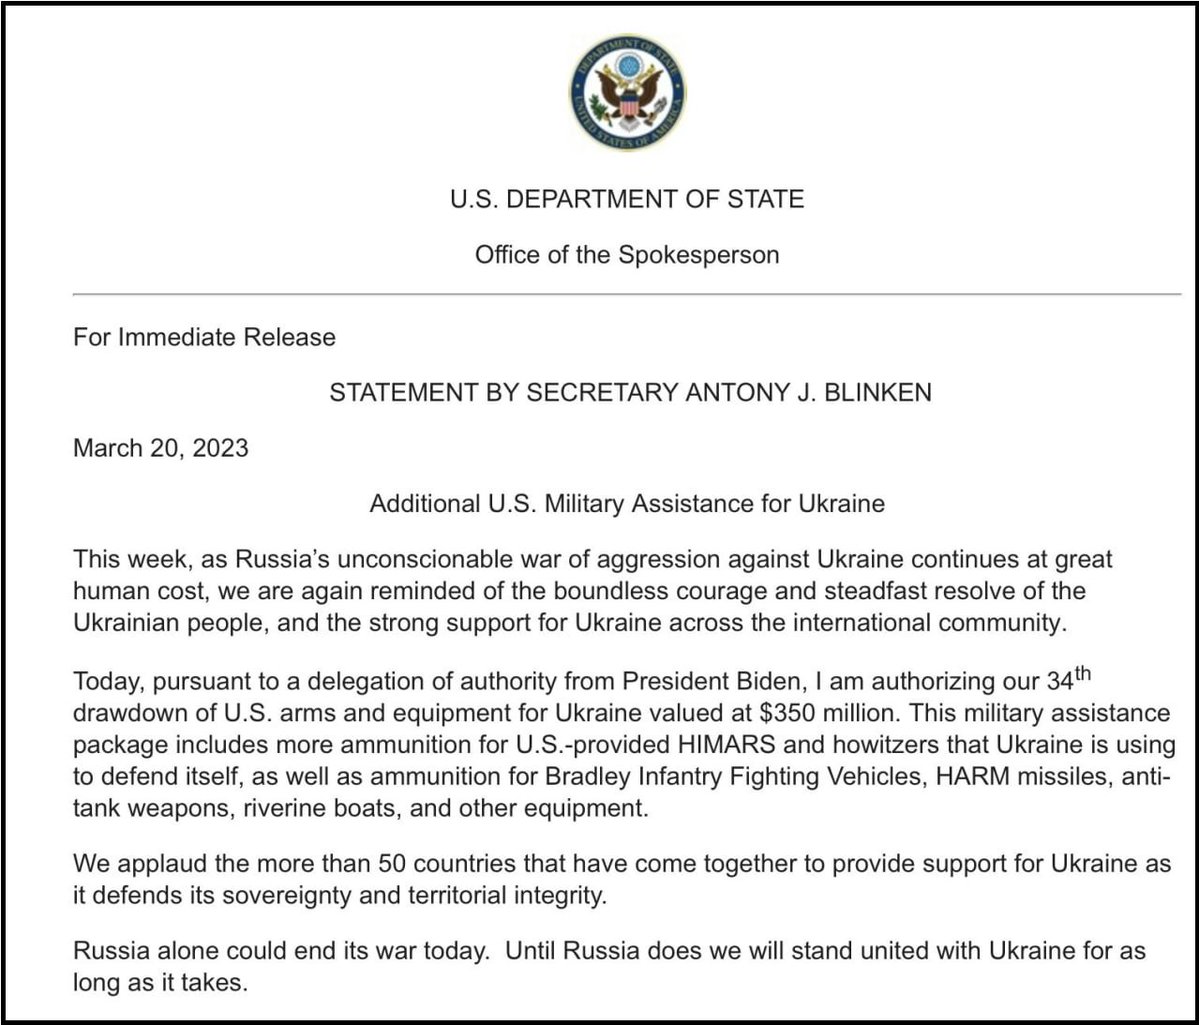 The United States approved a new, $350 million security assistance package for Ukraine.  It includes ammunition for M142 HIMARS/M270 MLRS and howitzers, as well as ammunition for Bradley IFVs, HARM air-to-surface anti-radiation missiles, anti-tank missiles and riverine boats